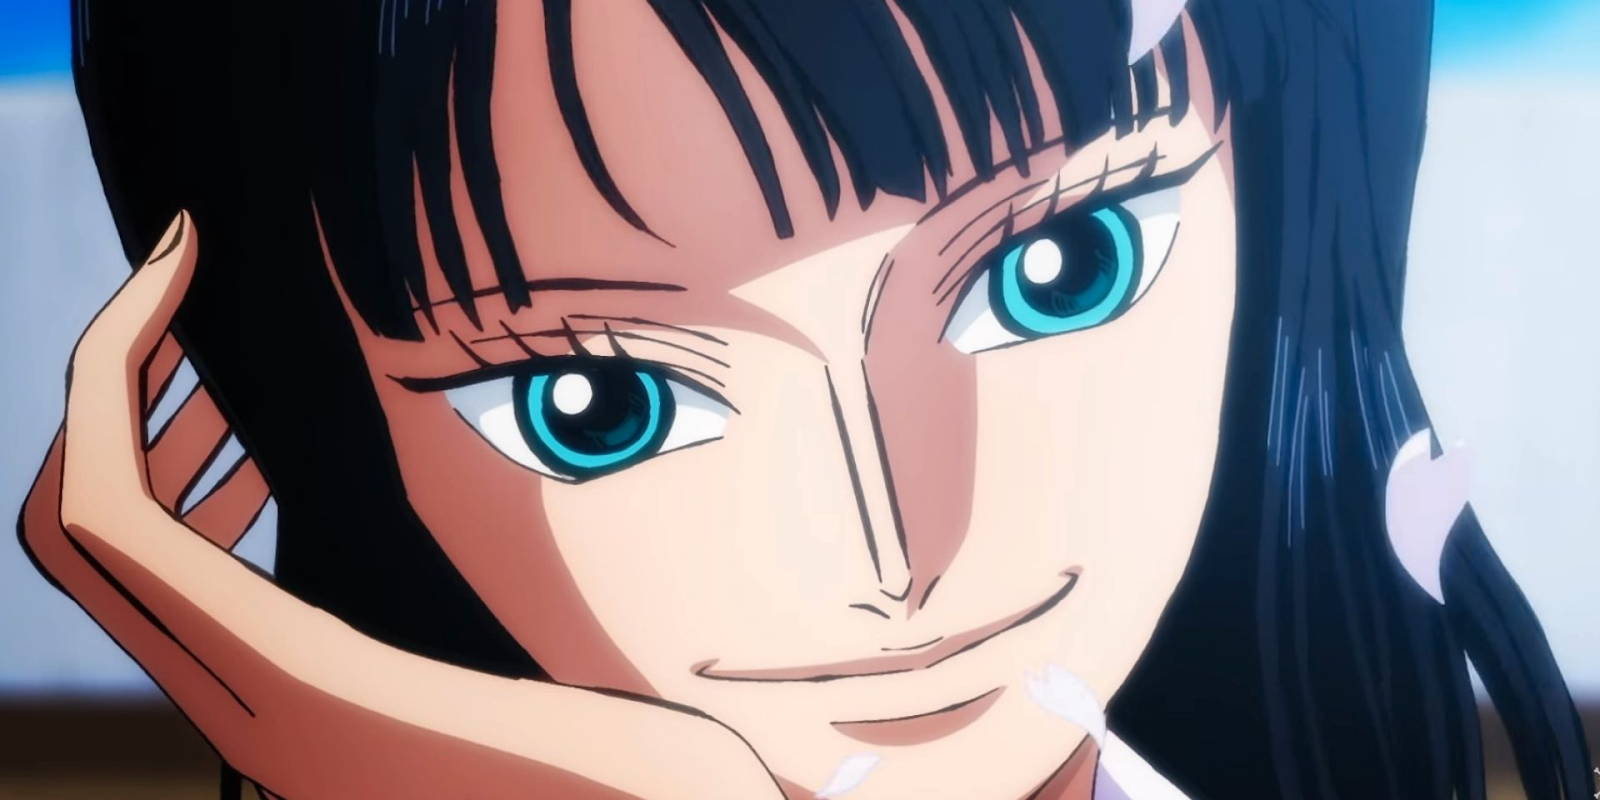 Who is Nico Robin in One Piece?